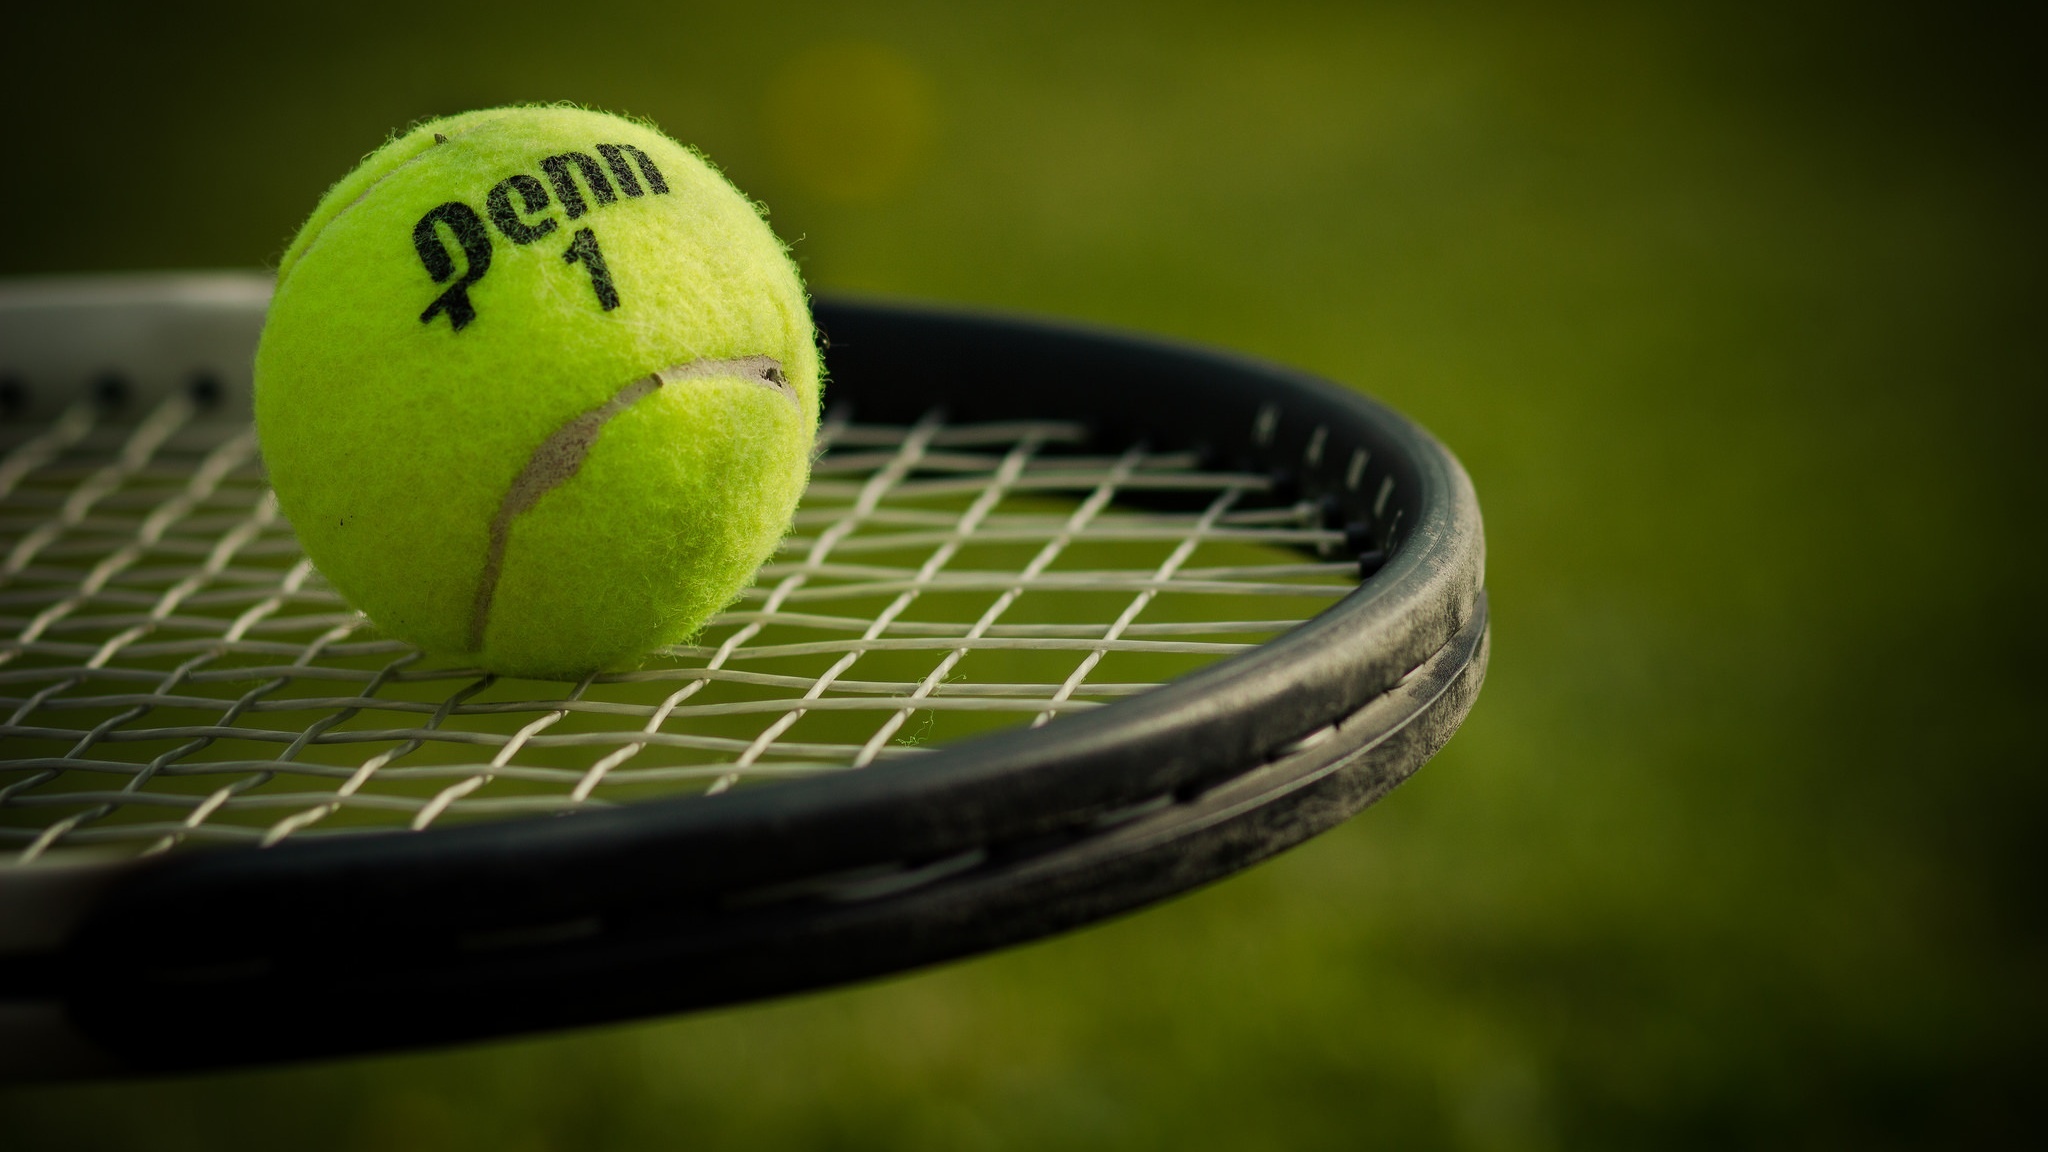 Tennis today 21.07. Match Schedule, Predictions & Betting Tips